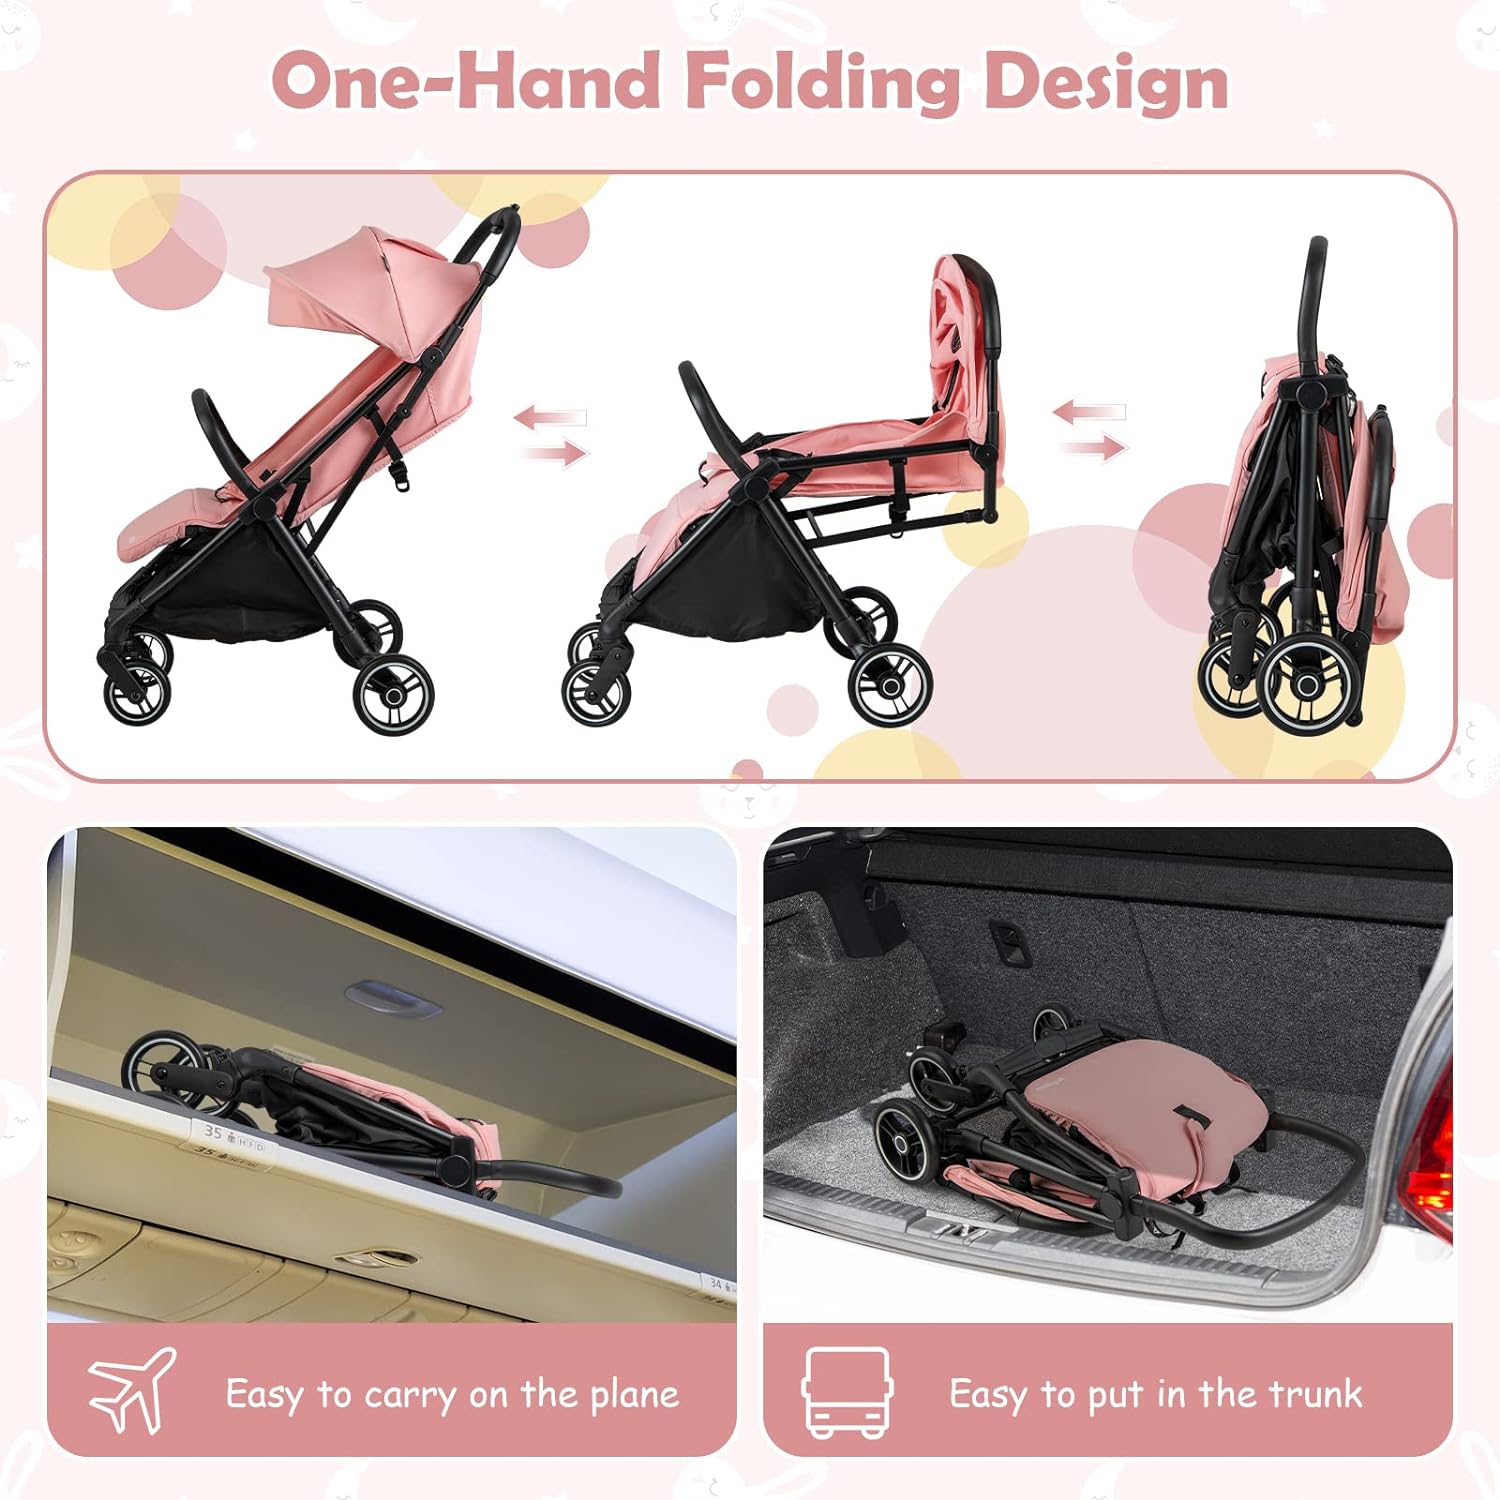 INFANS Lightweight Baby Stroller, One-Hand Gravity Fold, Compact Travel Stroller for Airplane with Aluminium Frame, Adjustable Backrest and Canopy, Foldable Infant Toddler Stroller for 0-36 Month